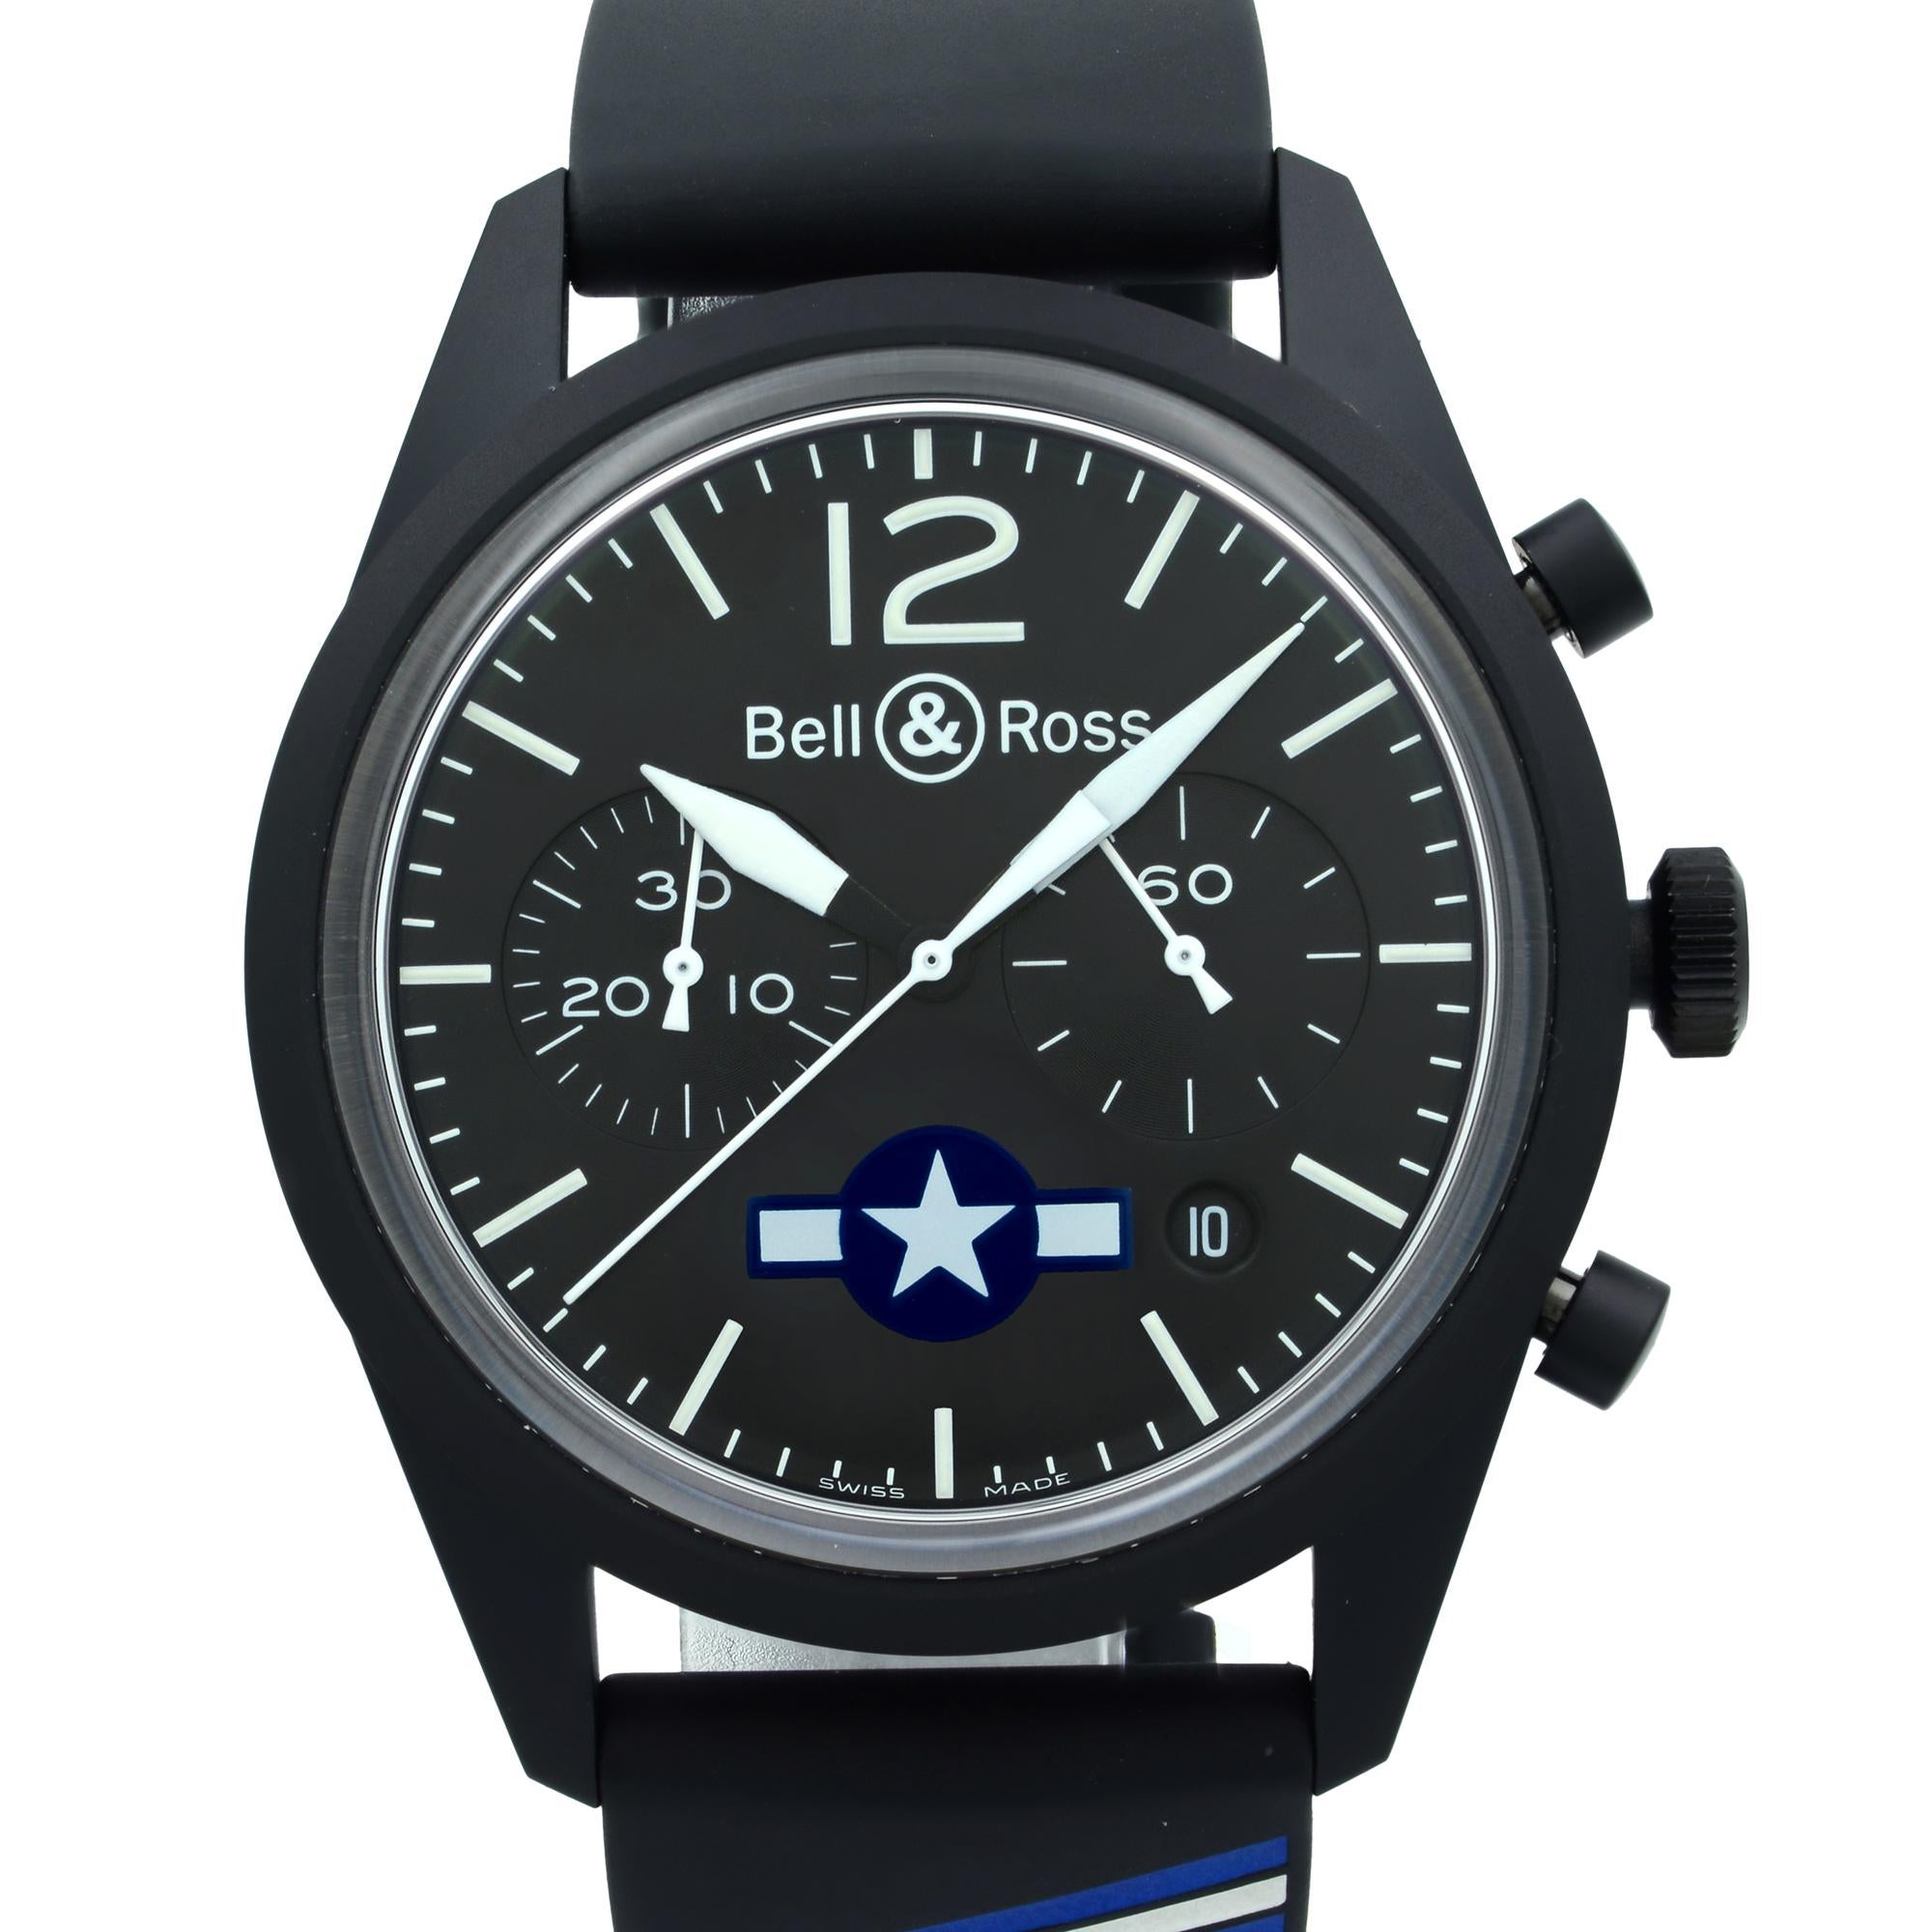 This watch is unworn. Comes with Original Box and Papers. Covered By 3 Year Chronostore Warranty
Details:
MSRP 4800
Brand Bell & Ross
Department Men
Model Number BRV126-BL-CA-CO/US
Model Bell & Ross WW1
Style Luxury, Pilot/Aviator
Band Color